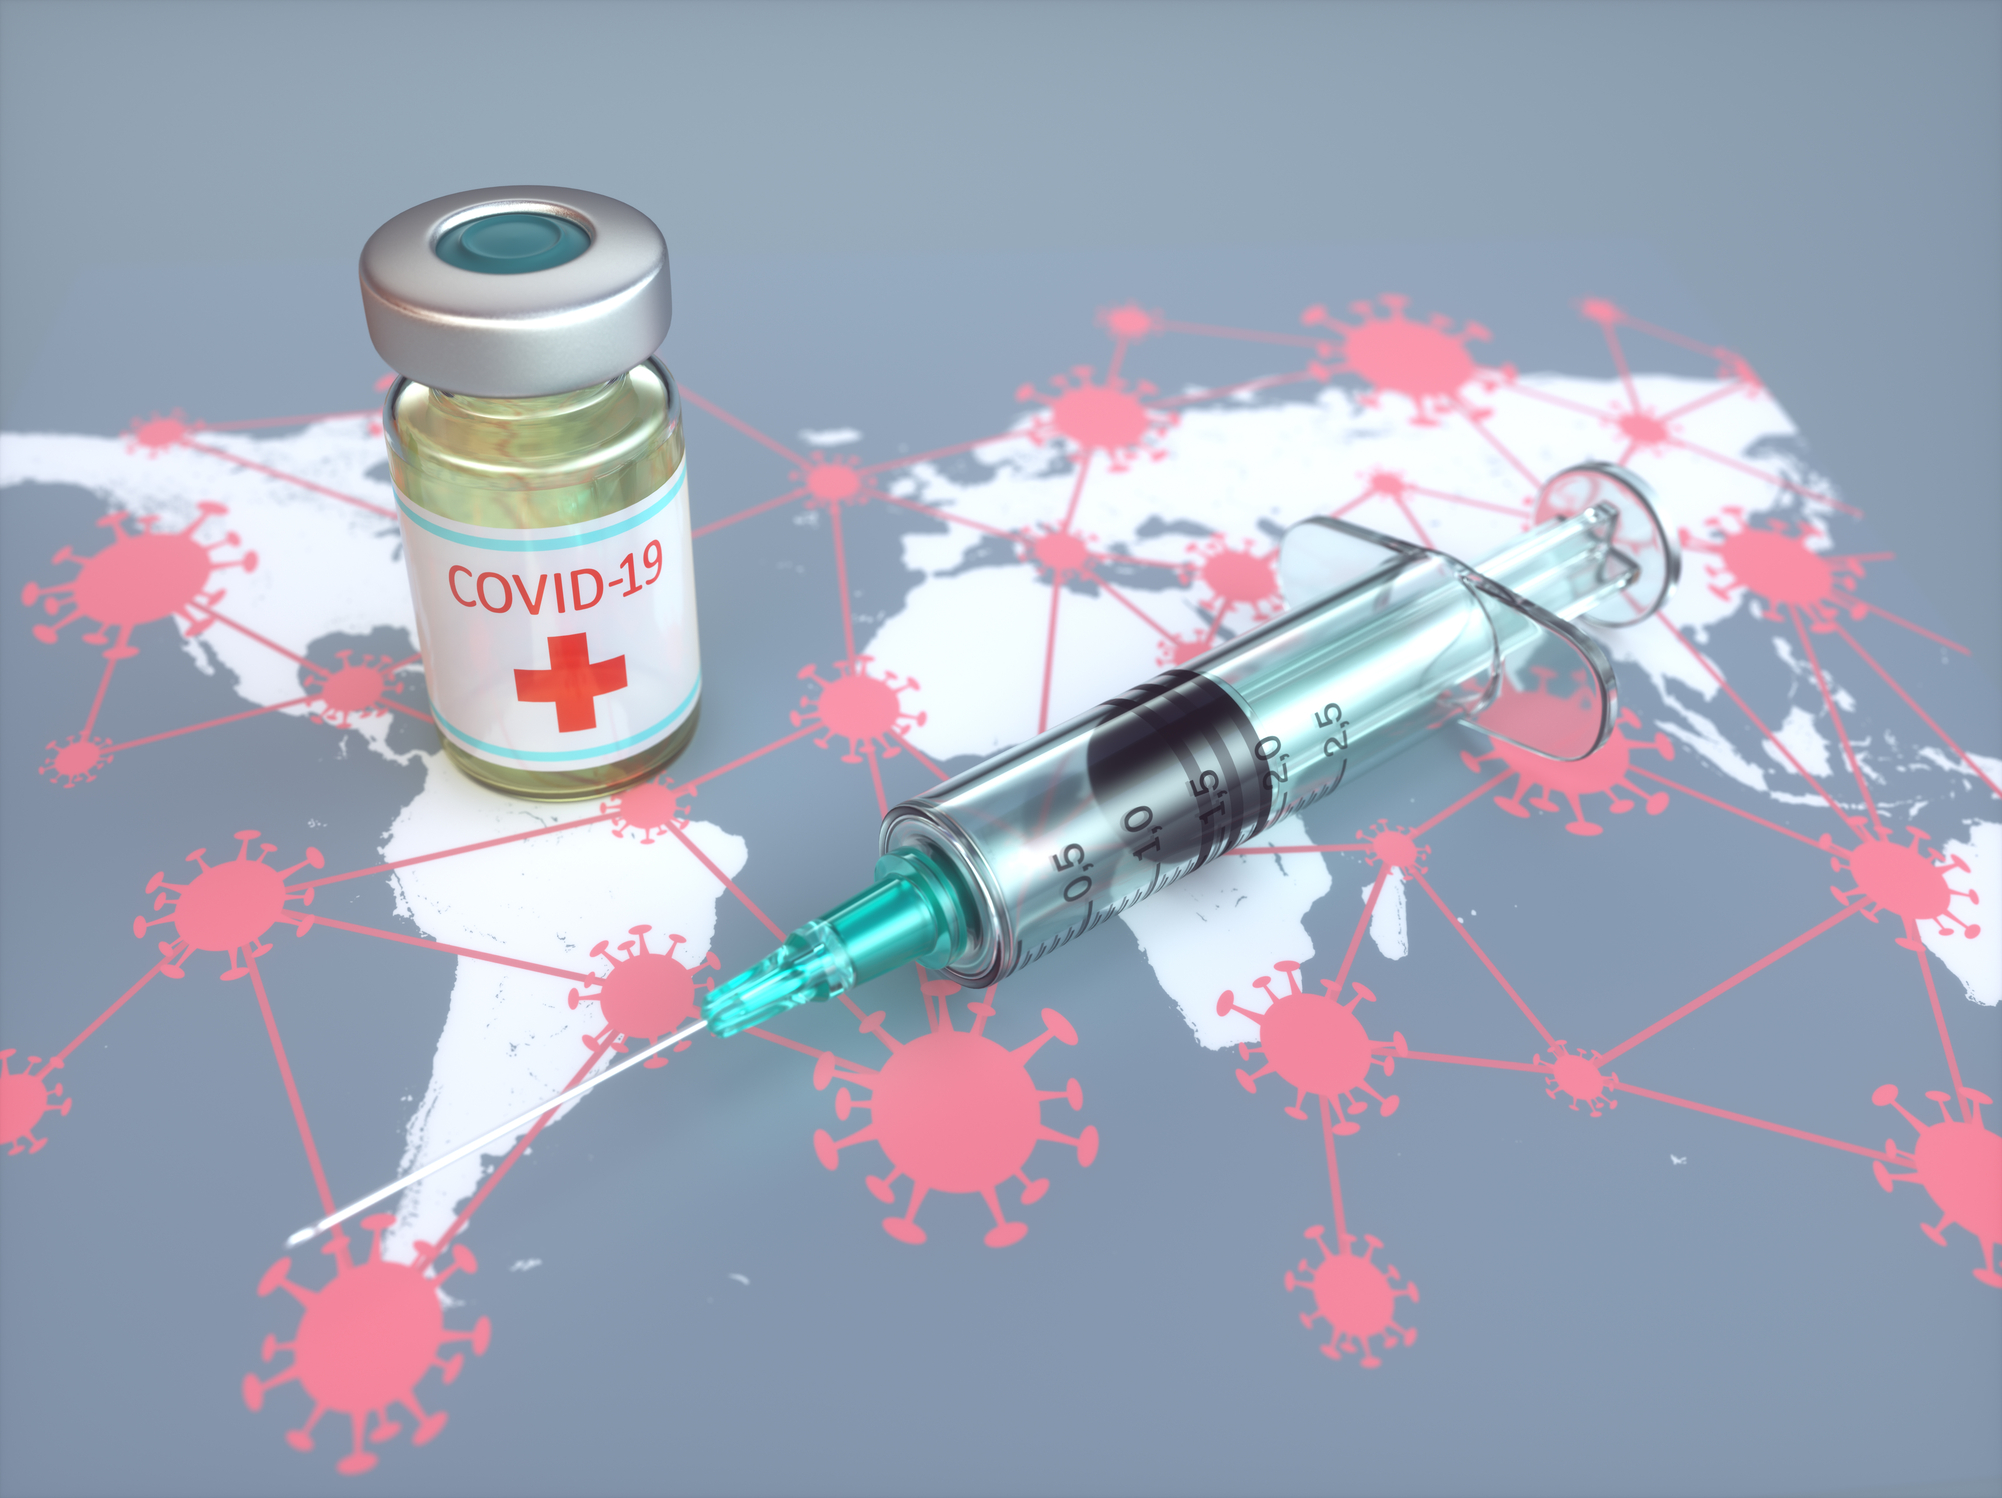 Conceptual image of COVID-19 vaccine and COVID infection on a world map